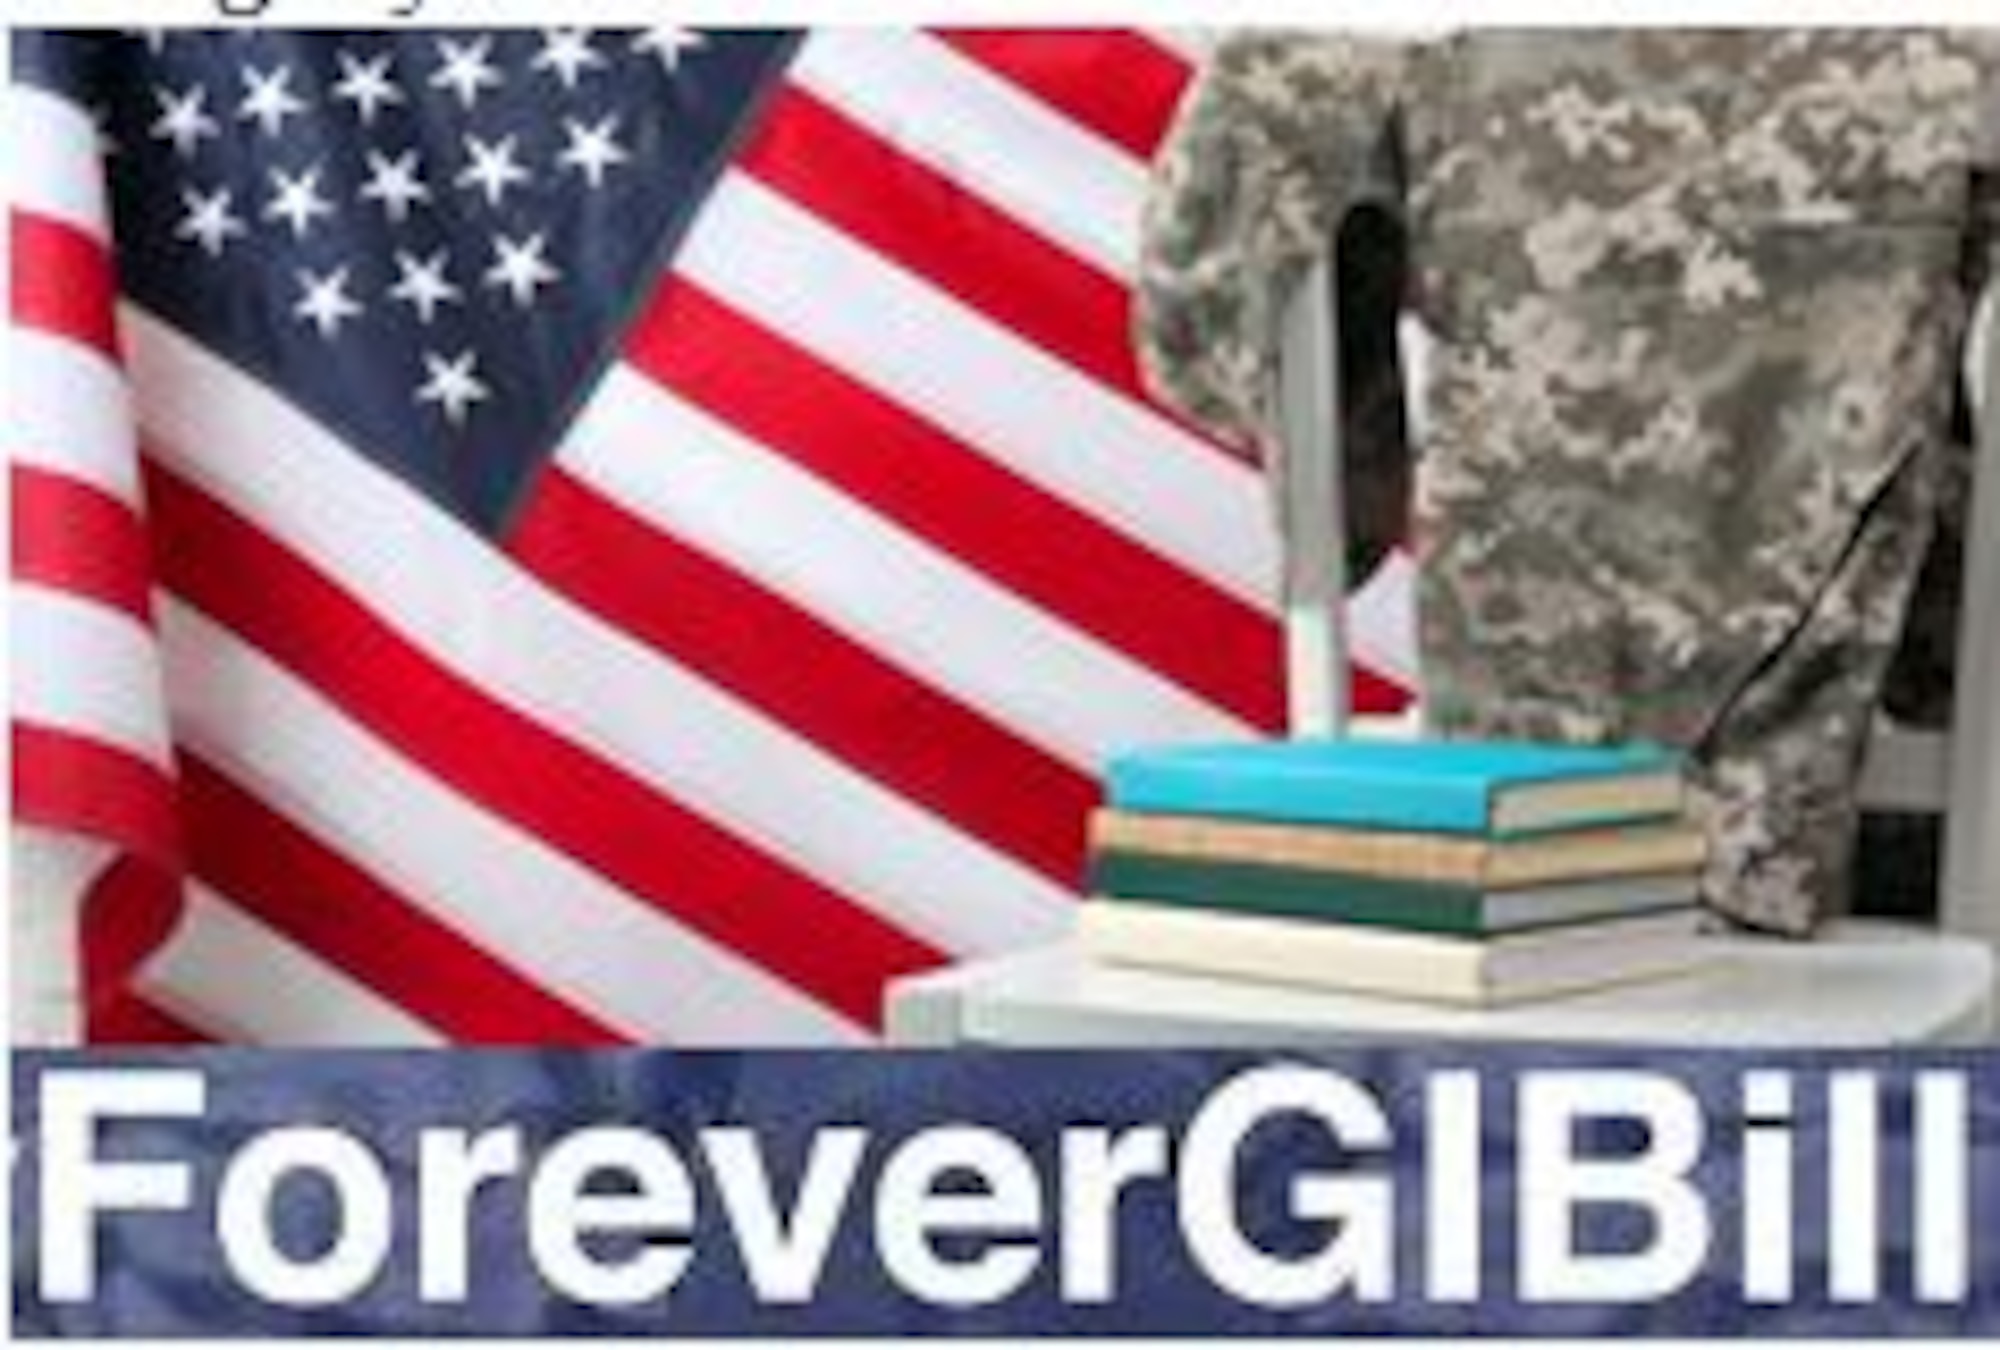 Effective Aug. 1, the U.S. Department of Veterans Affairs, or VA, implemented 15 more provisions of the Harry W. Colmery Educational Assistance Act of 2017, also referred to as the Forever GI Bill.